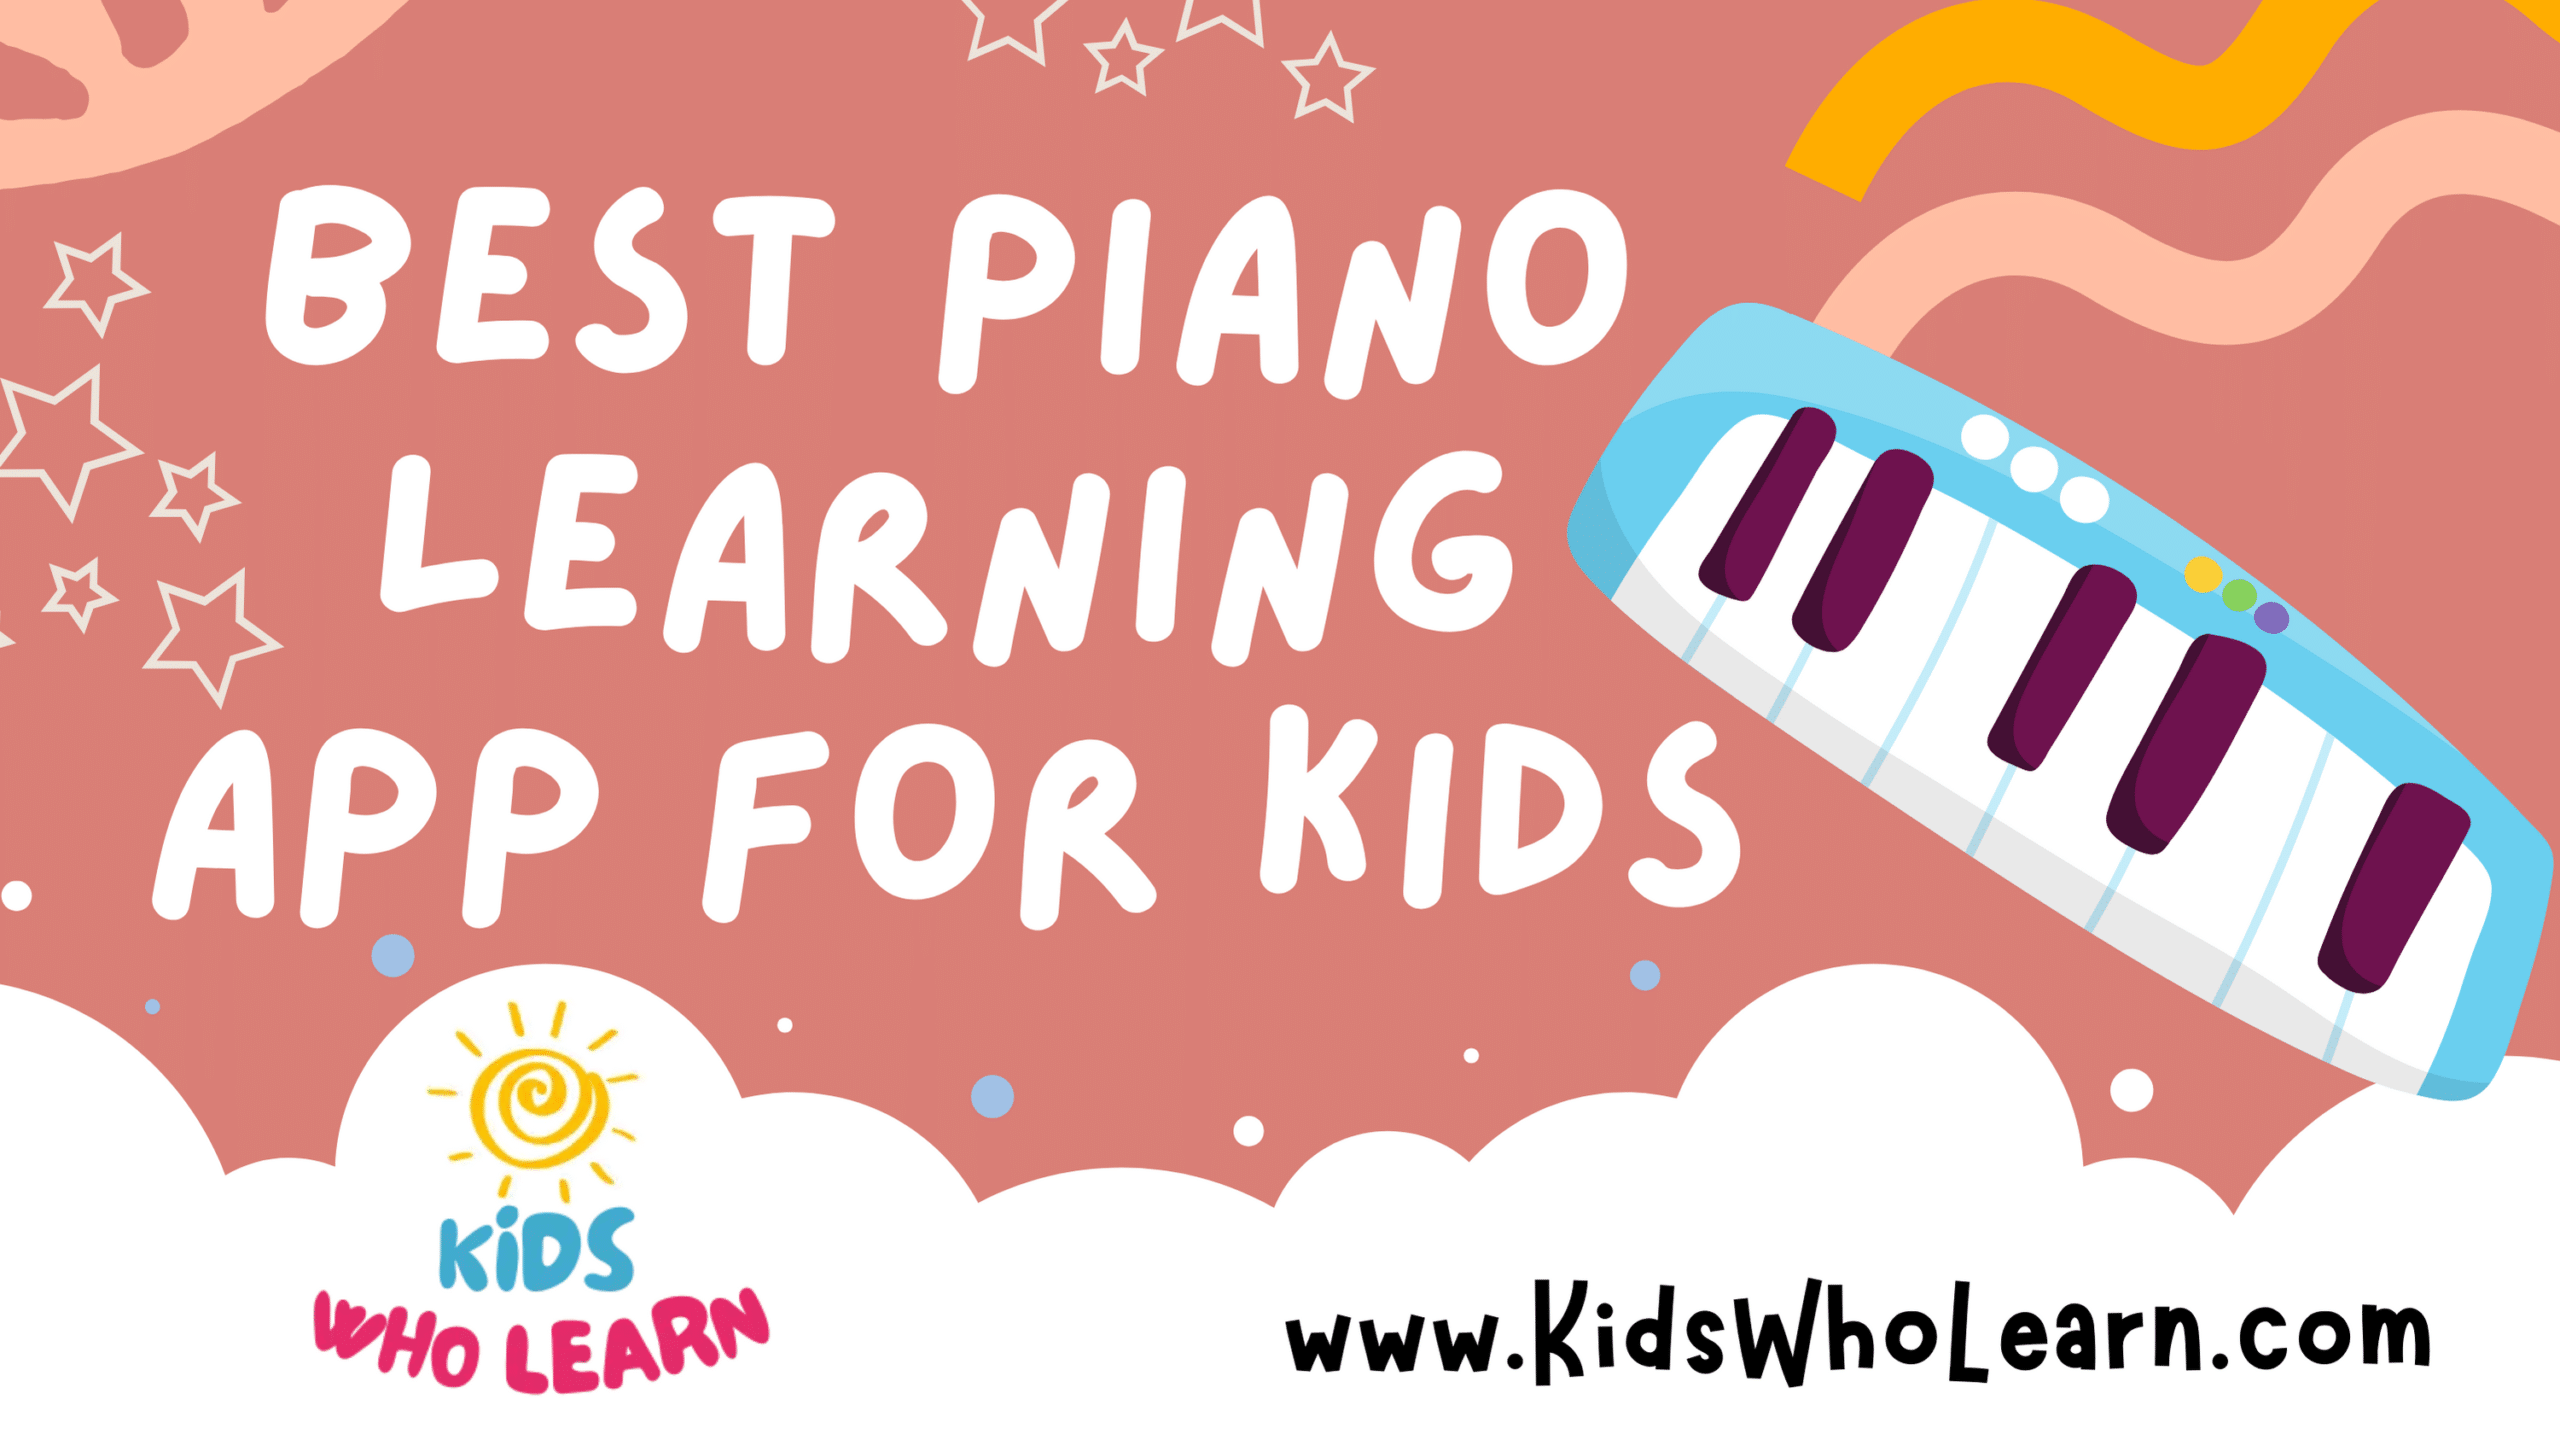 The Best Piano Learning App for Kids: for Young Musicians